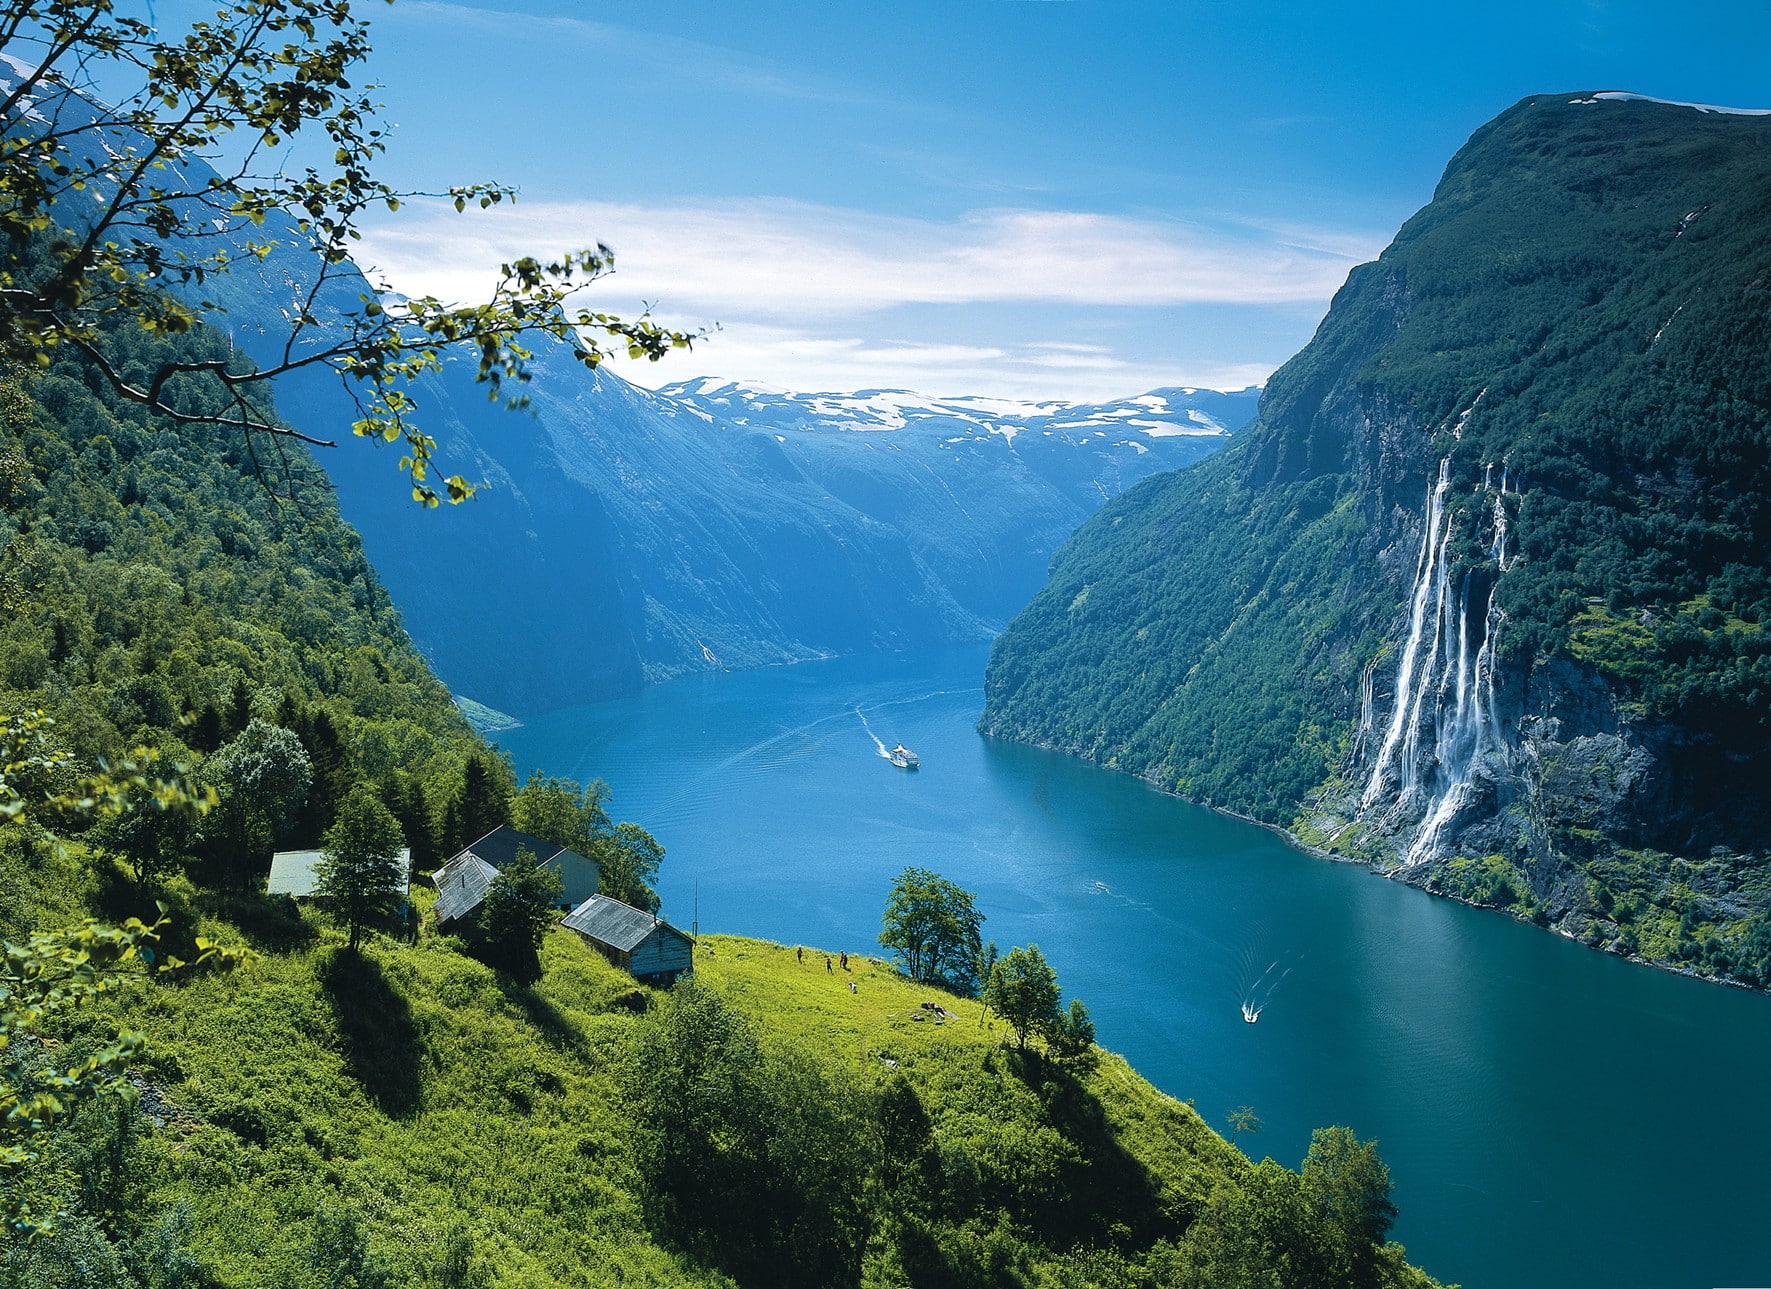 Norway, mountains, water, scenics - nature, beauty in nature